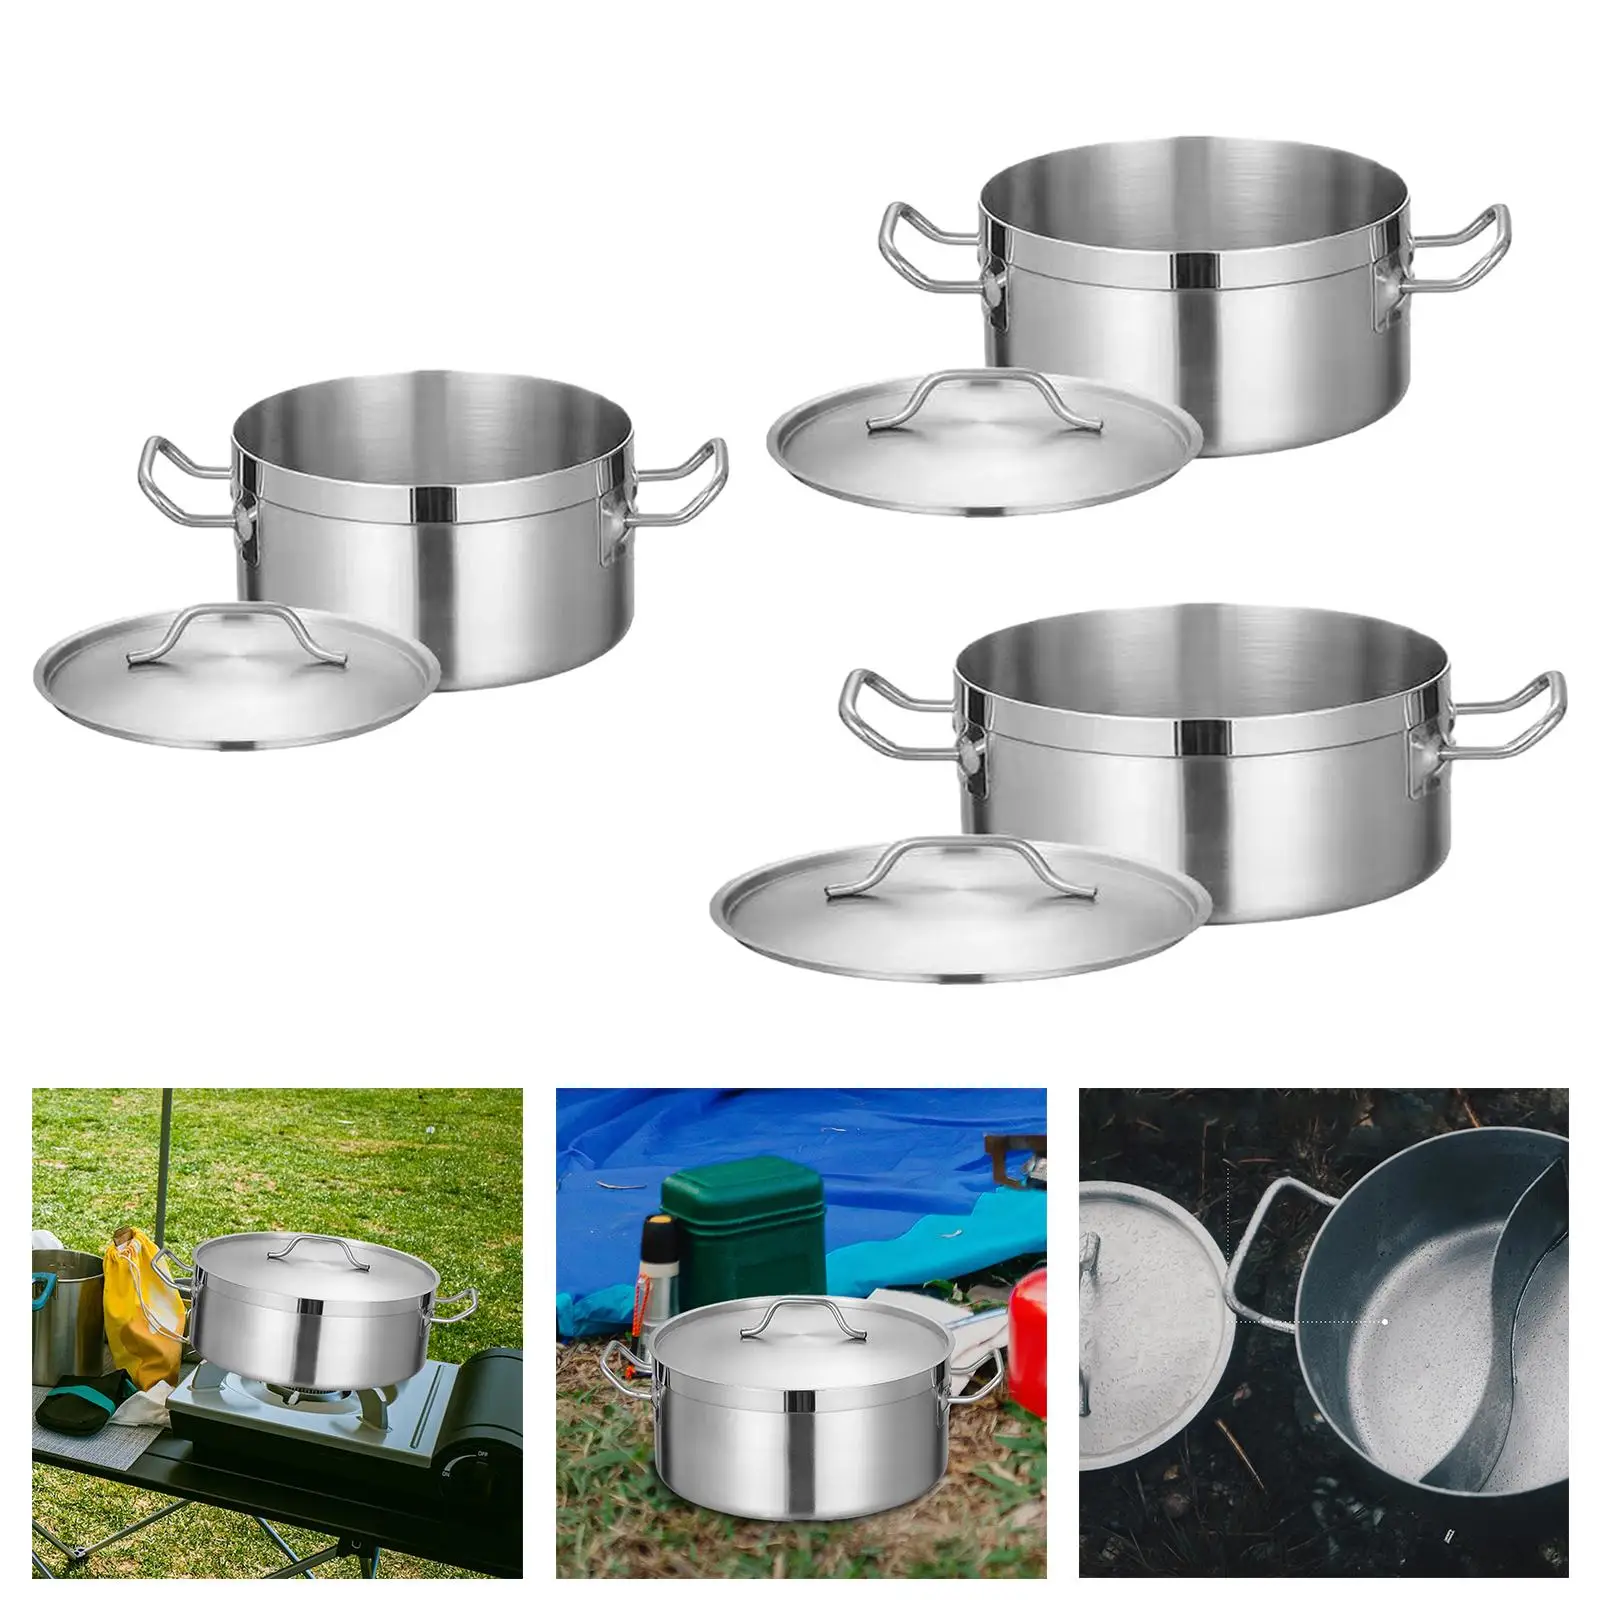 Stainless Steel Stockpot Cookware Heavy Duty Multipurpose Induction Stockpot Soup Pot for Kitchen Outdoor Camping Household